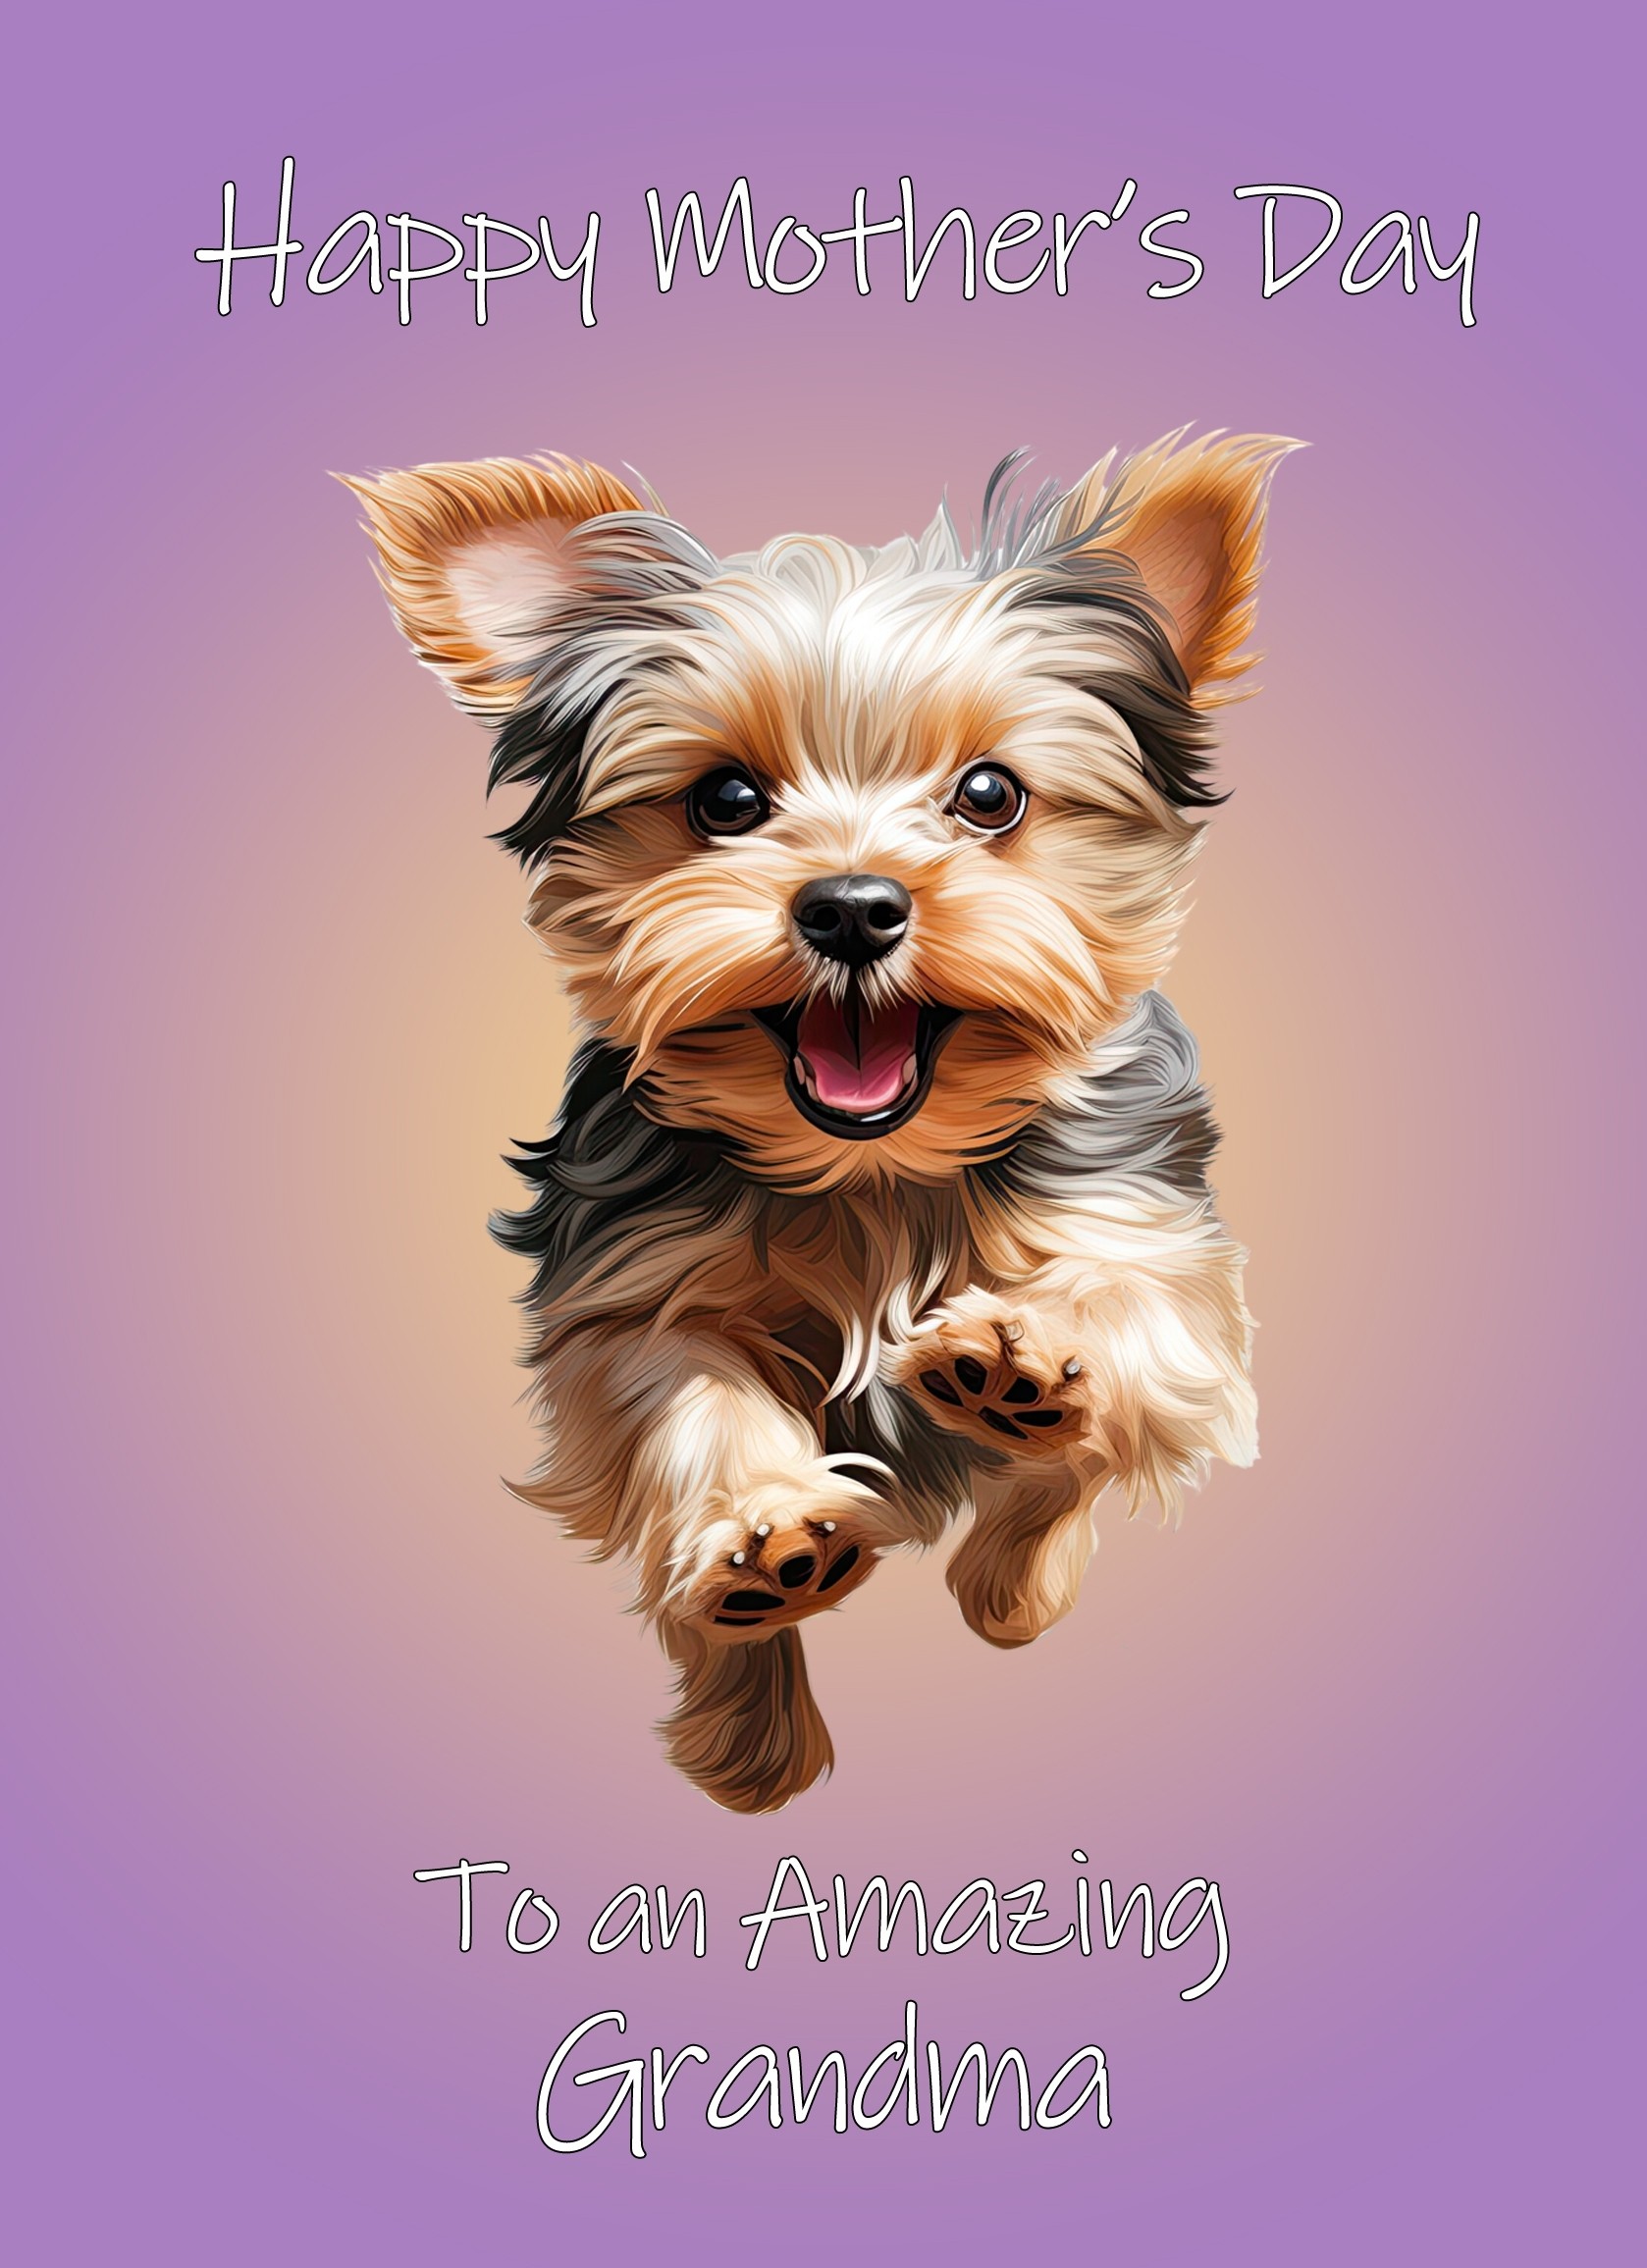 Yorkshire Terrier Dog Mothers Day Card For Grandma